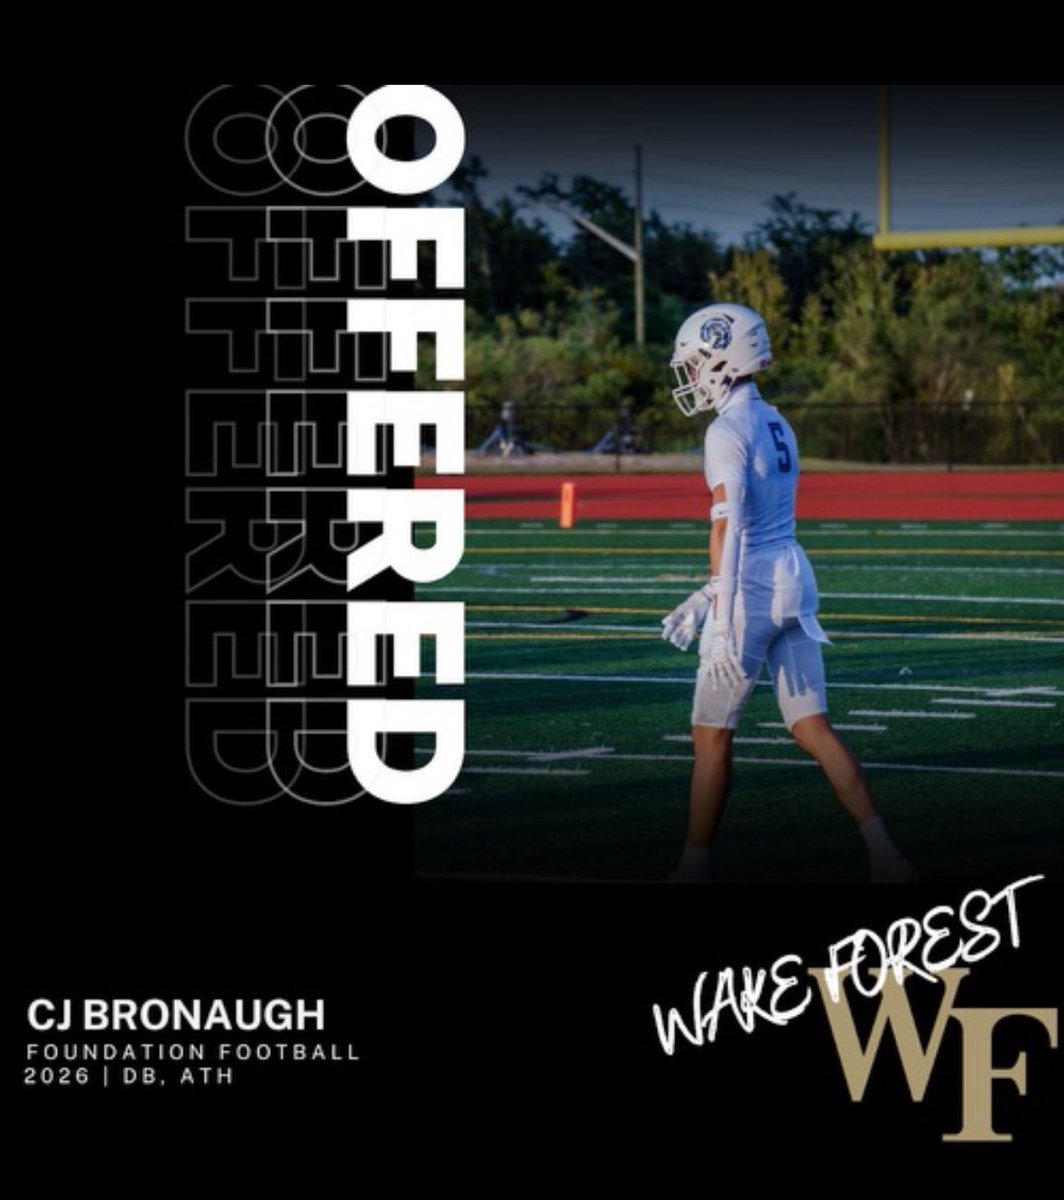 After an outstanding conversation with @cchipwest @CoachClawson I am blessed to have earned an offer from Wake Forest University. @Get_Activept @CoachWalker0223 @Andrew_Ivins @PrepRedzoneFL @On3Recruits @Rivals @CenFLAPreps @FbStutsman @karlos_sr @DanLaForestFB @larryblustein